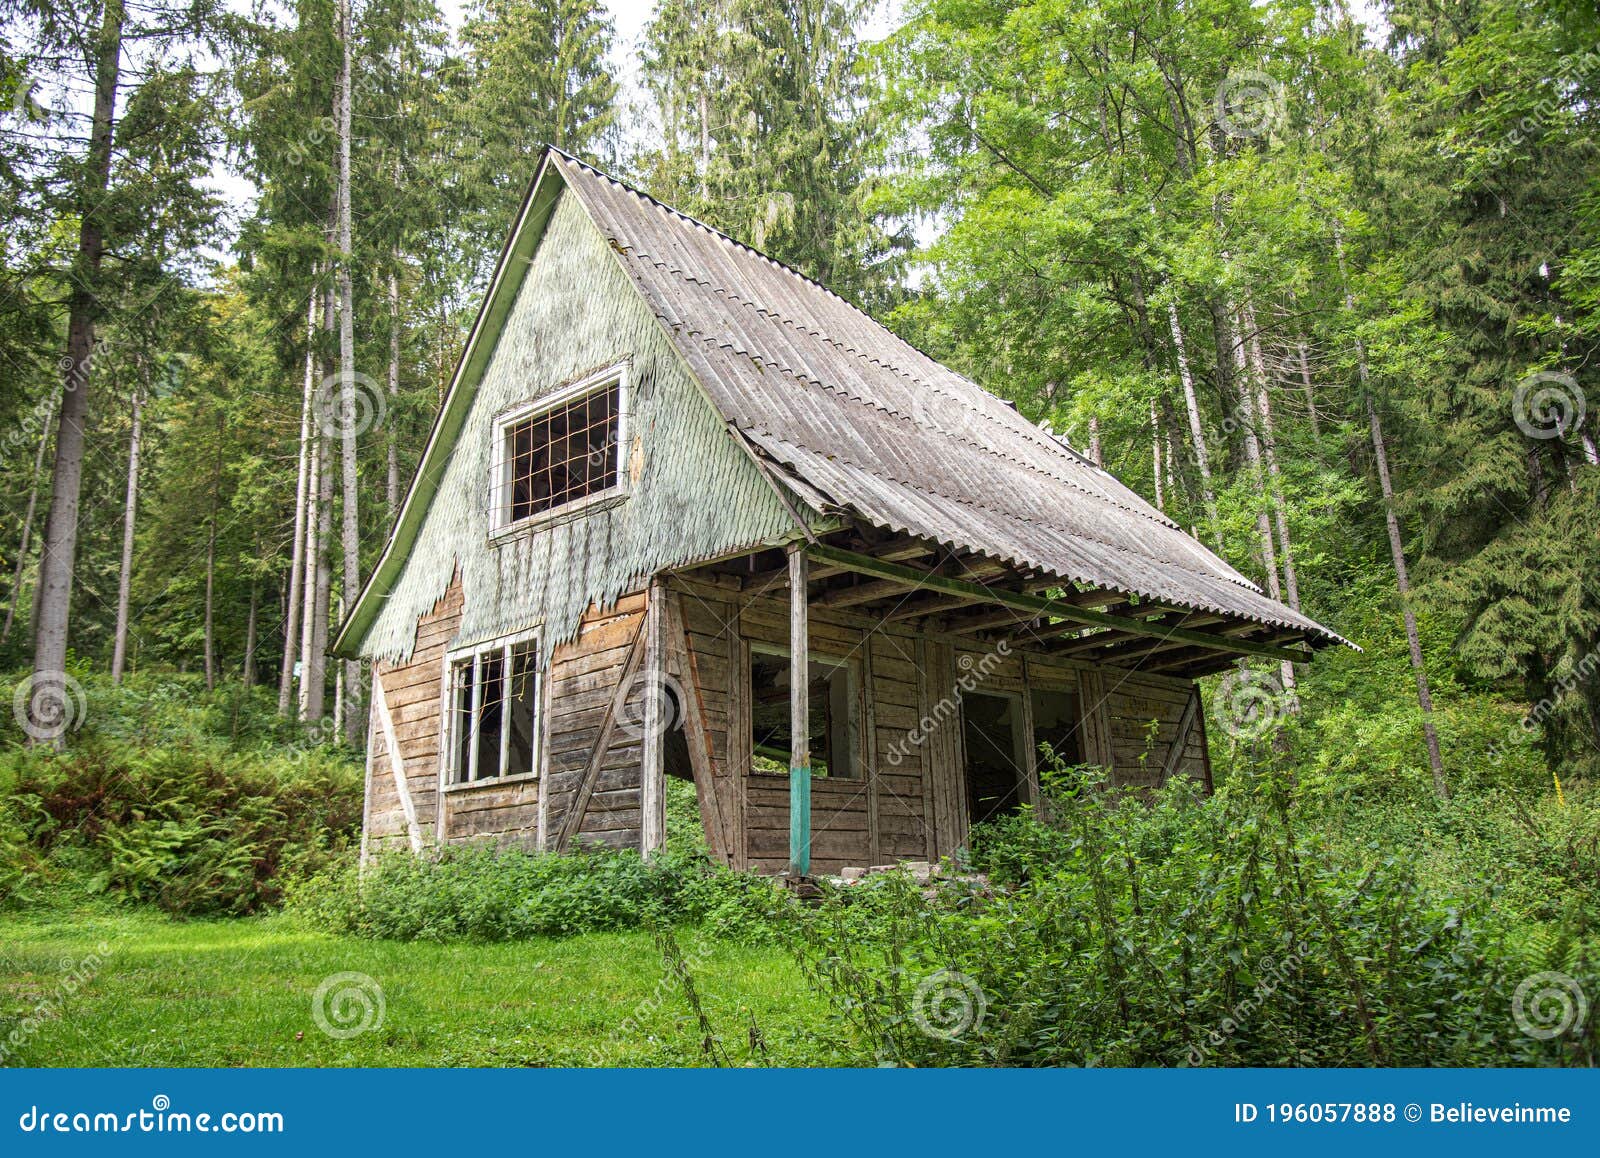 Abandoned Old House in the Woods Stock Photo - Image of construction ...